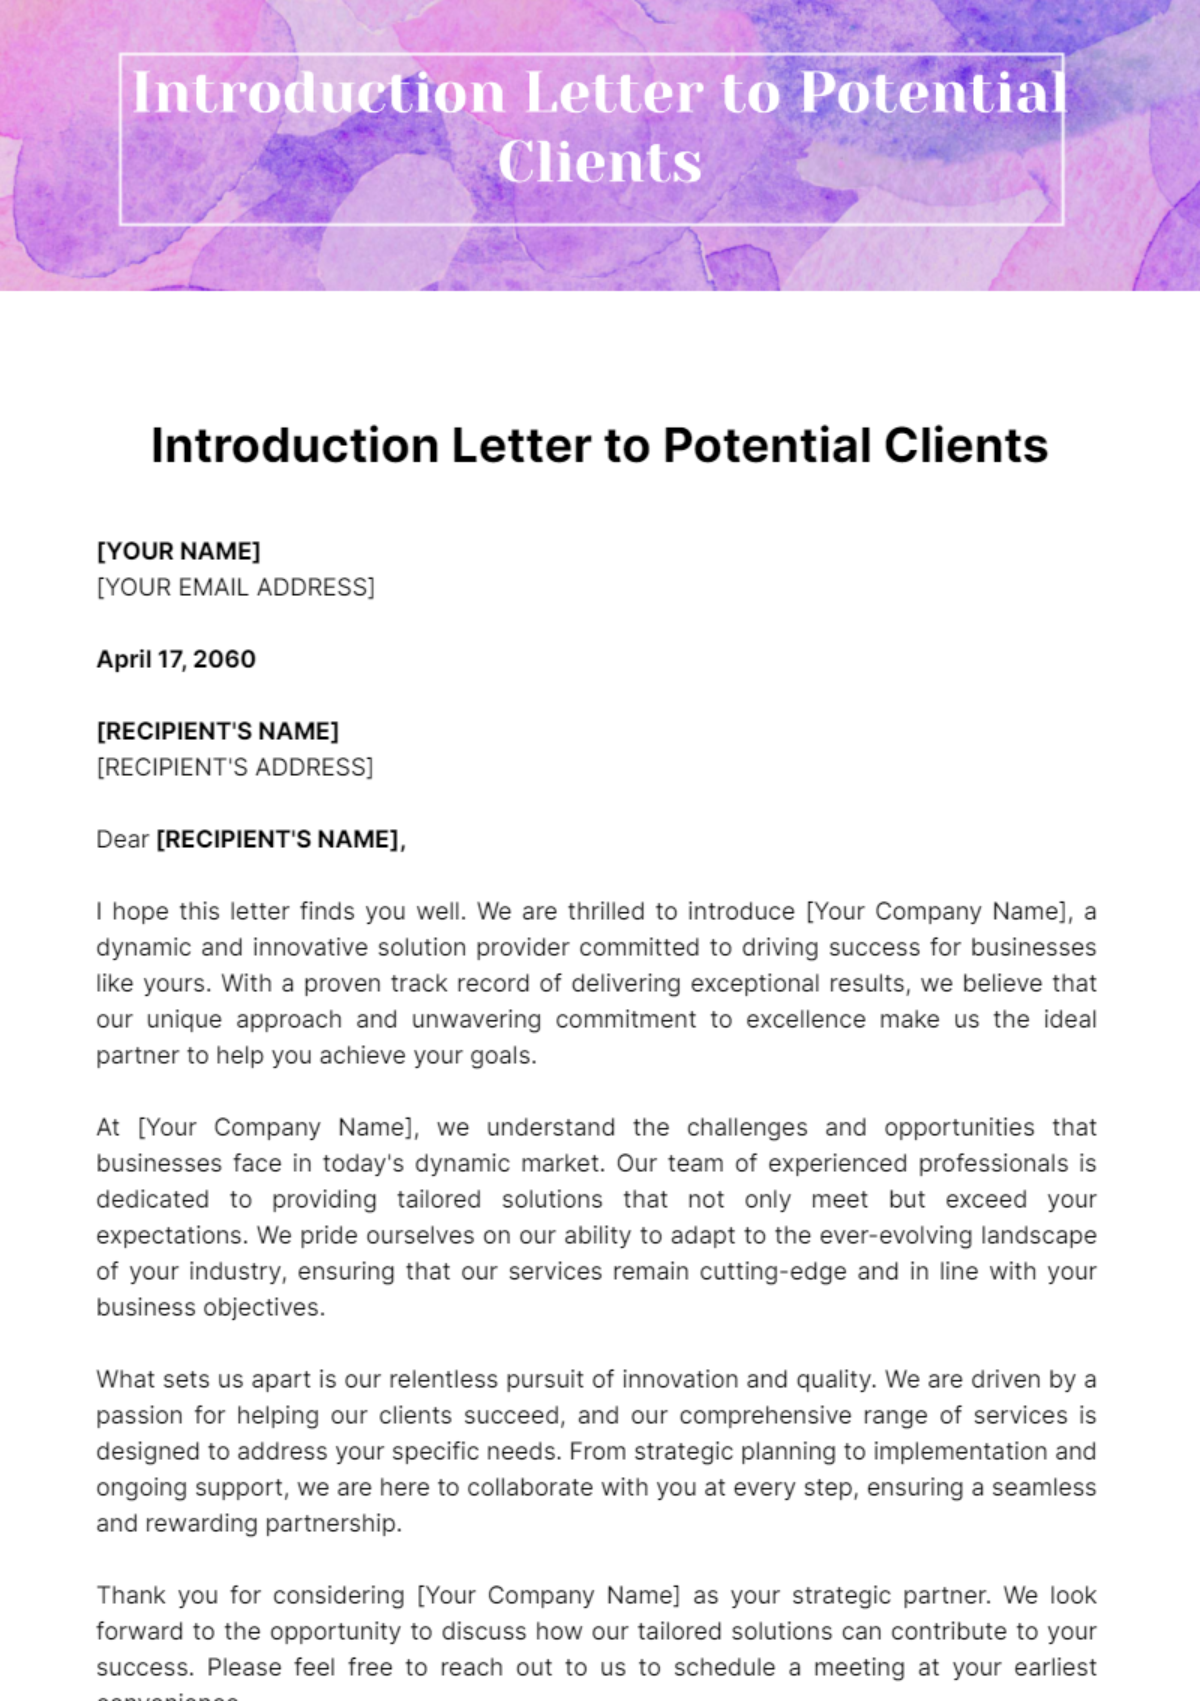 Free Introduction Letter to Potential Clients Template